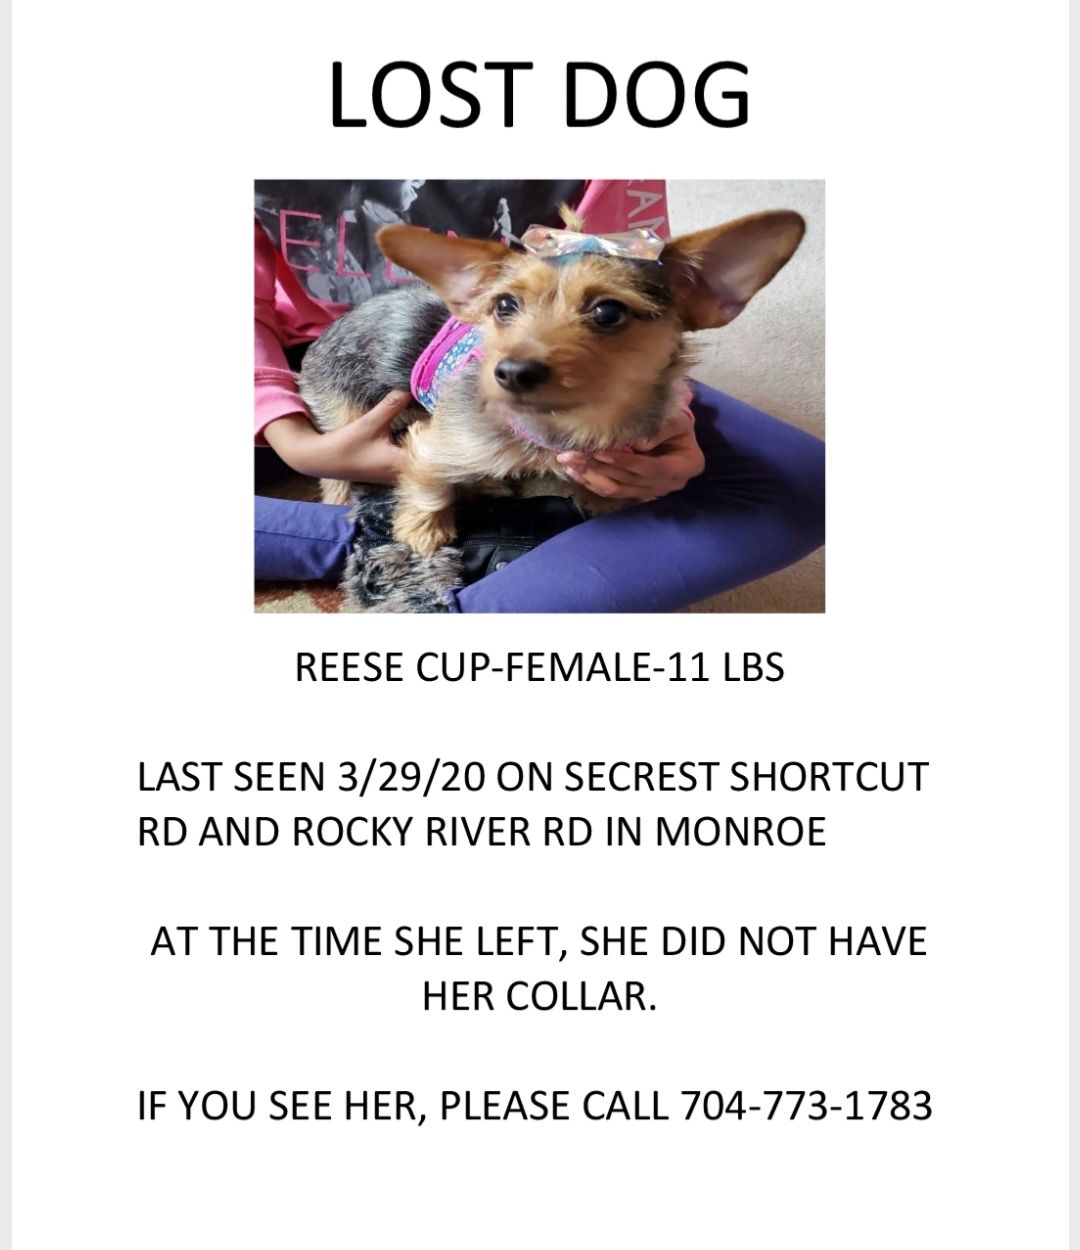 Image of Reese Cup, Lost Dog